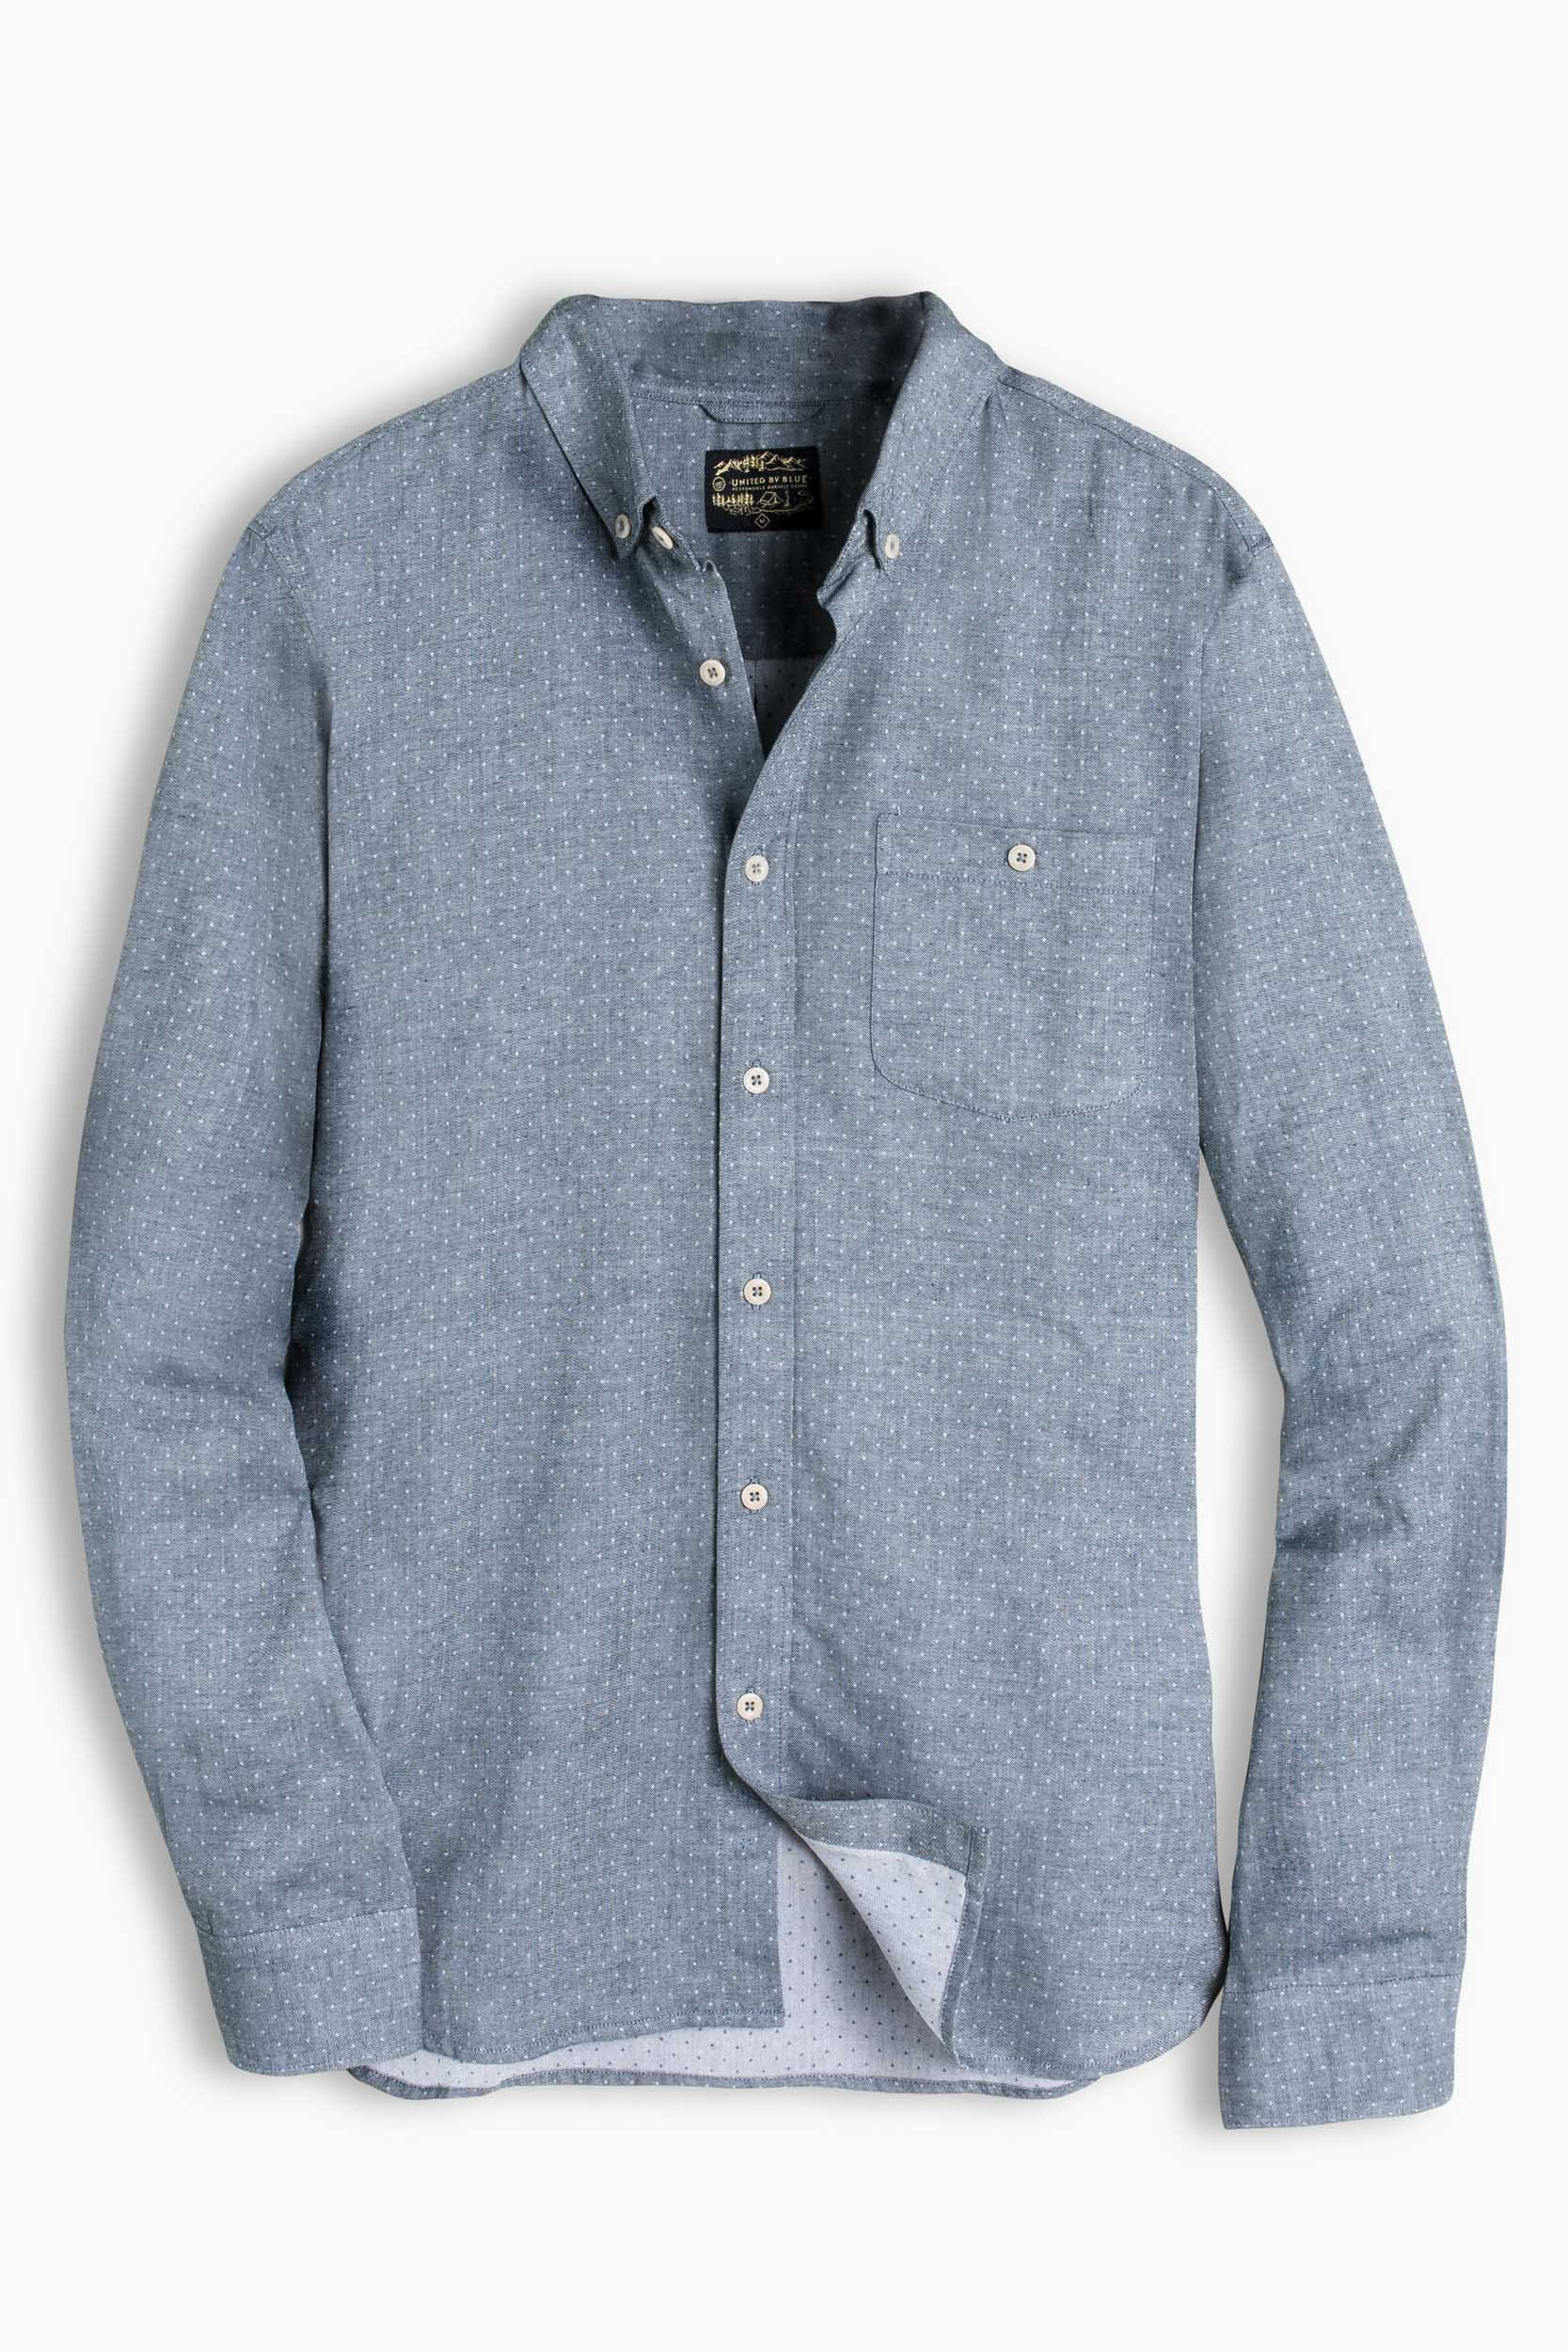 United By Blue Stillwell Dotted Twill Button Down